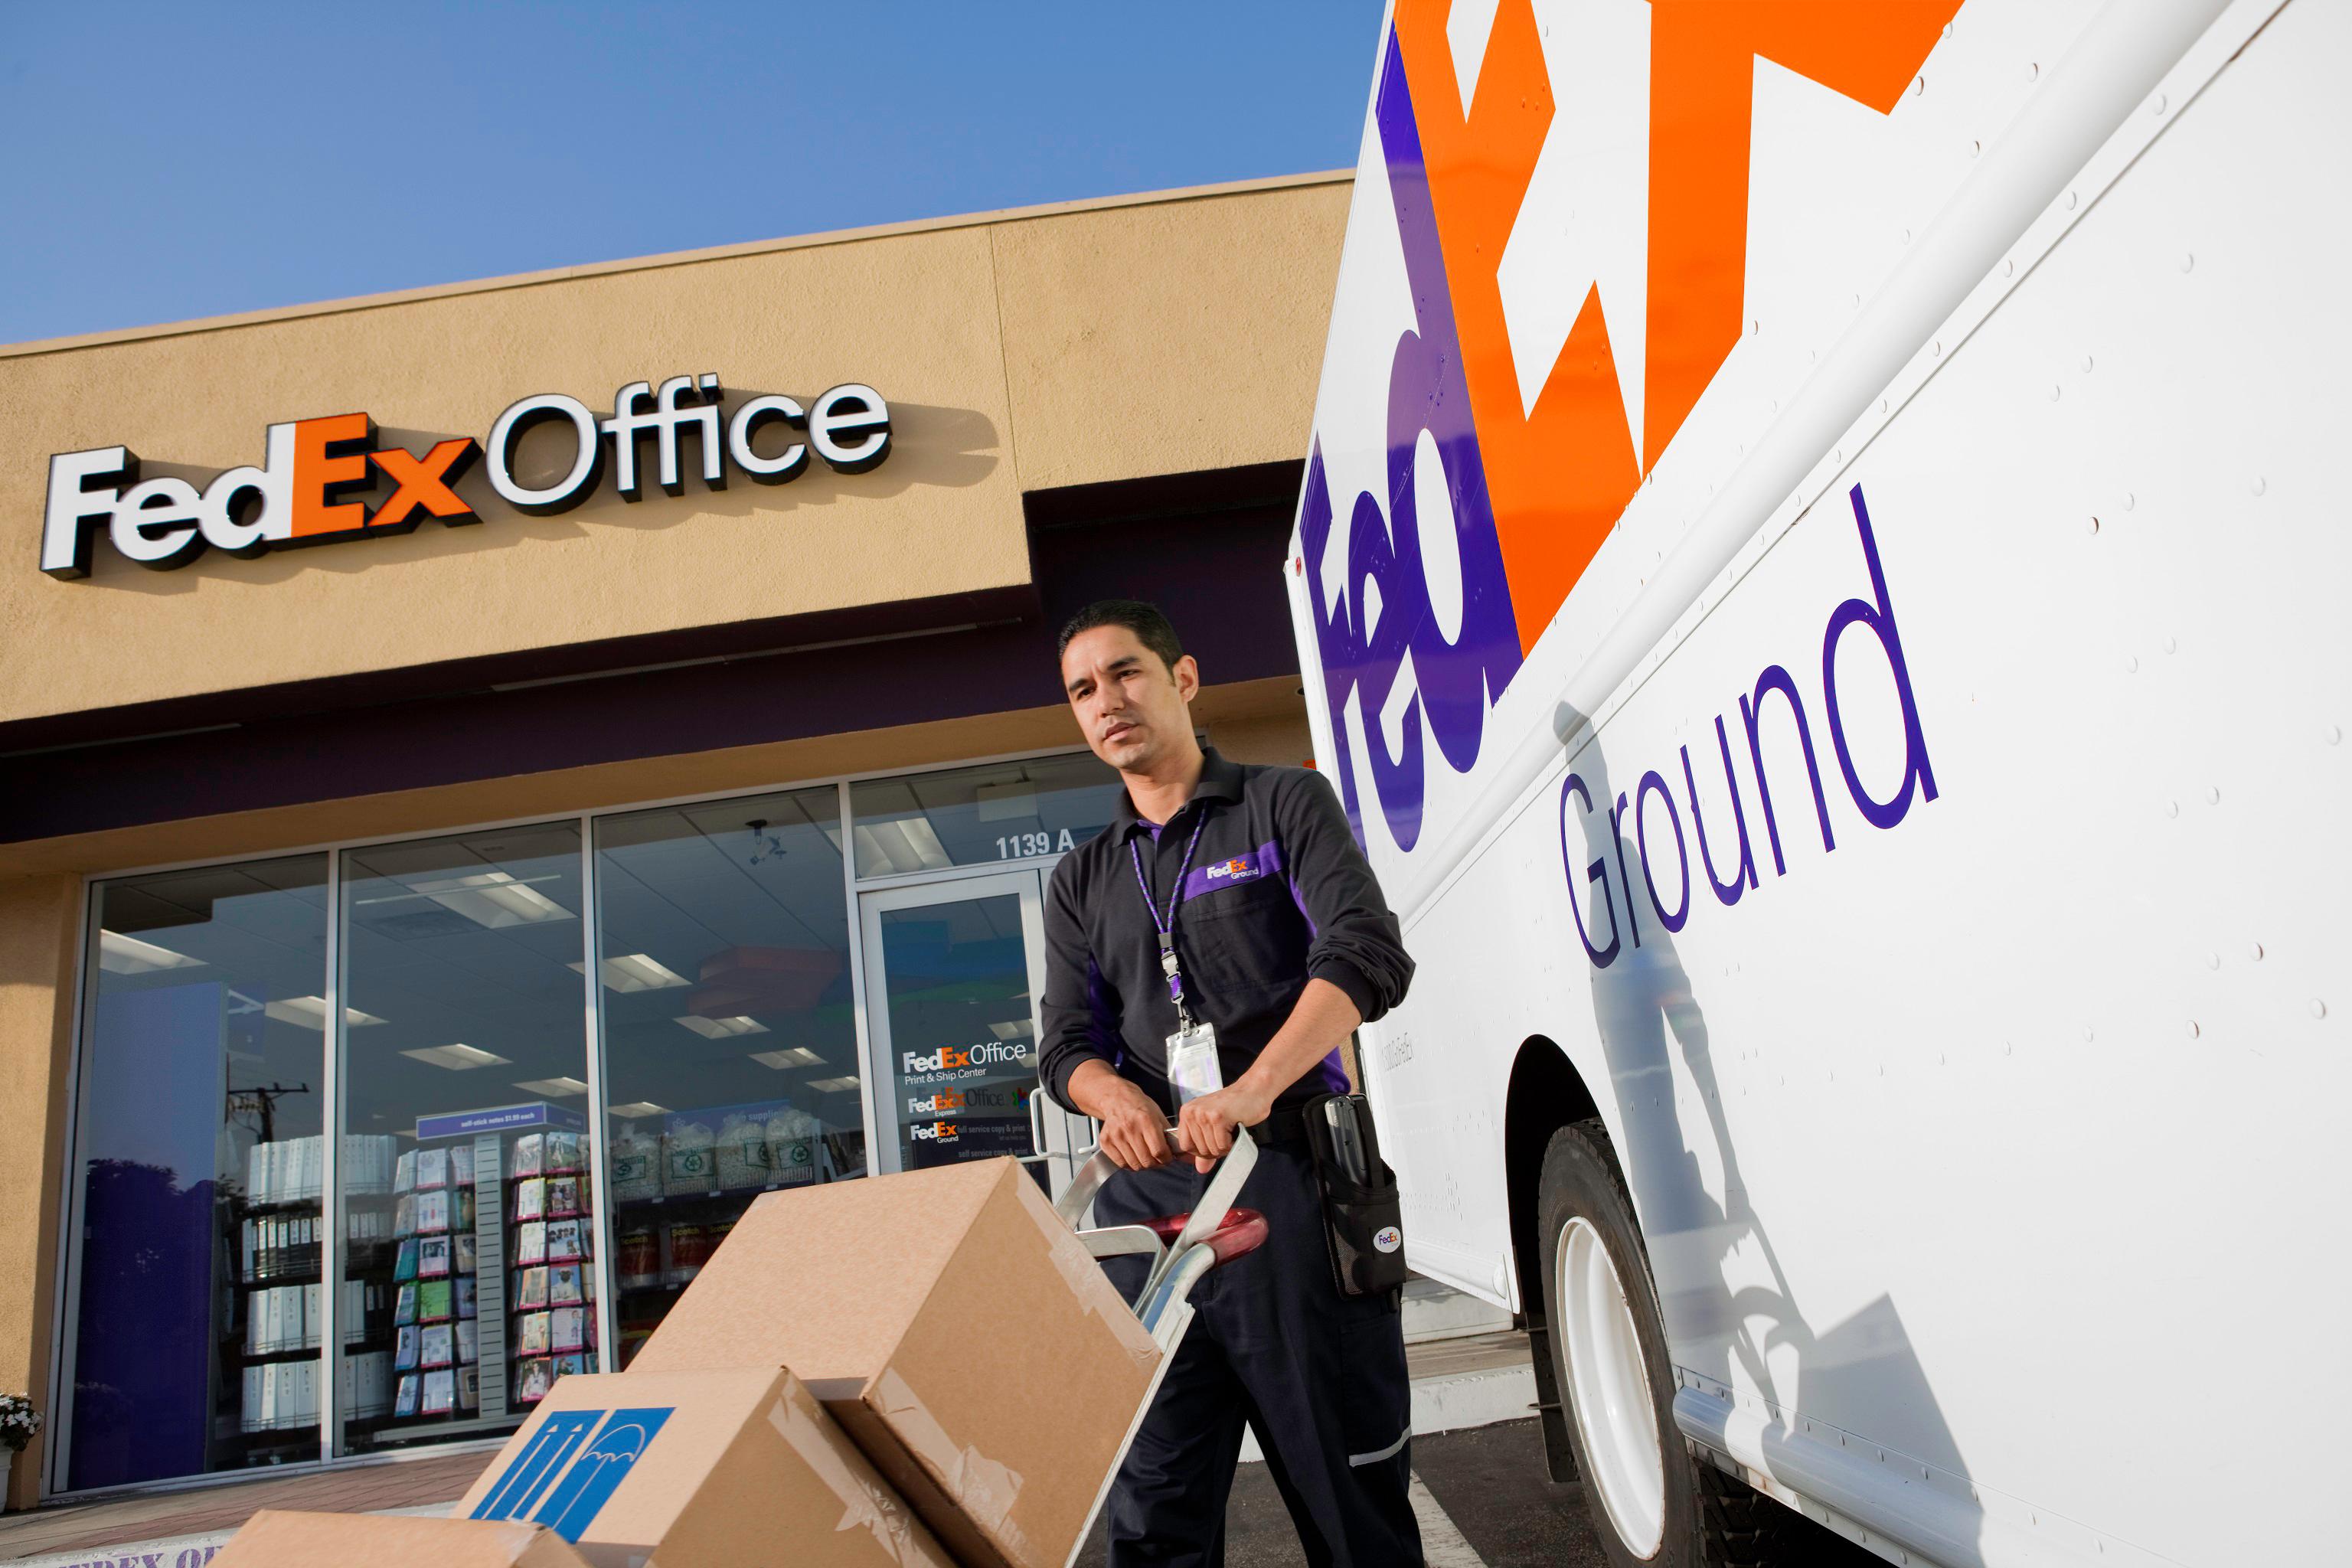 Ship with FedEx Express and FedEx Ground at FedEx Office.